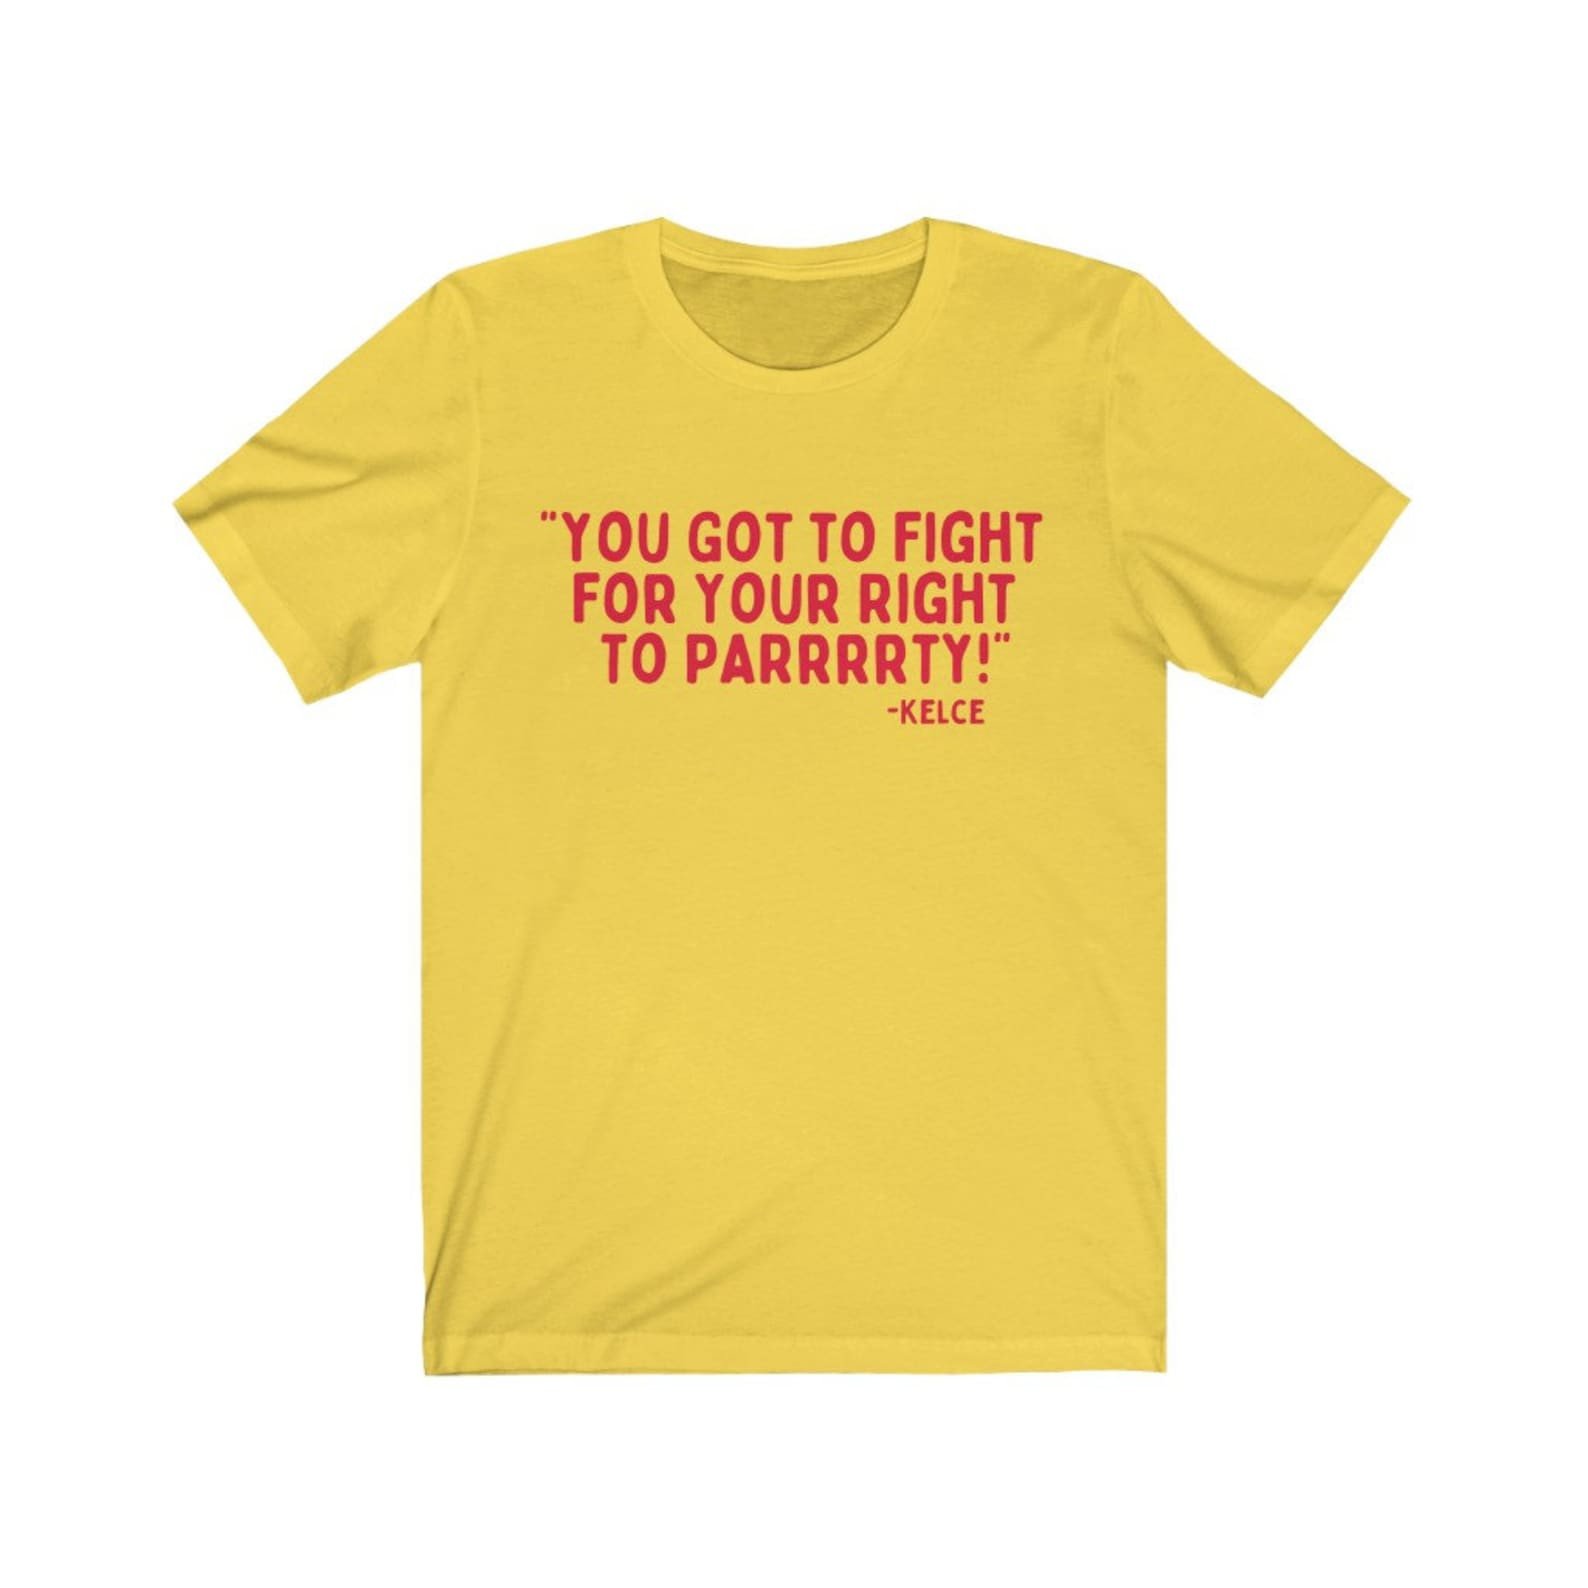 You Got To Fight For Your Right To Party  Chiefs Vintage Shirt  Kc Retro Tshirt  Kansas City Chiefs T Shirt  Arrow Head Stadium Apparel